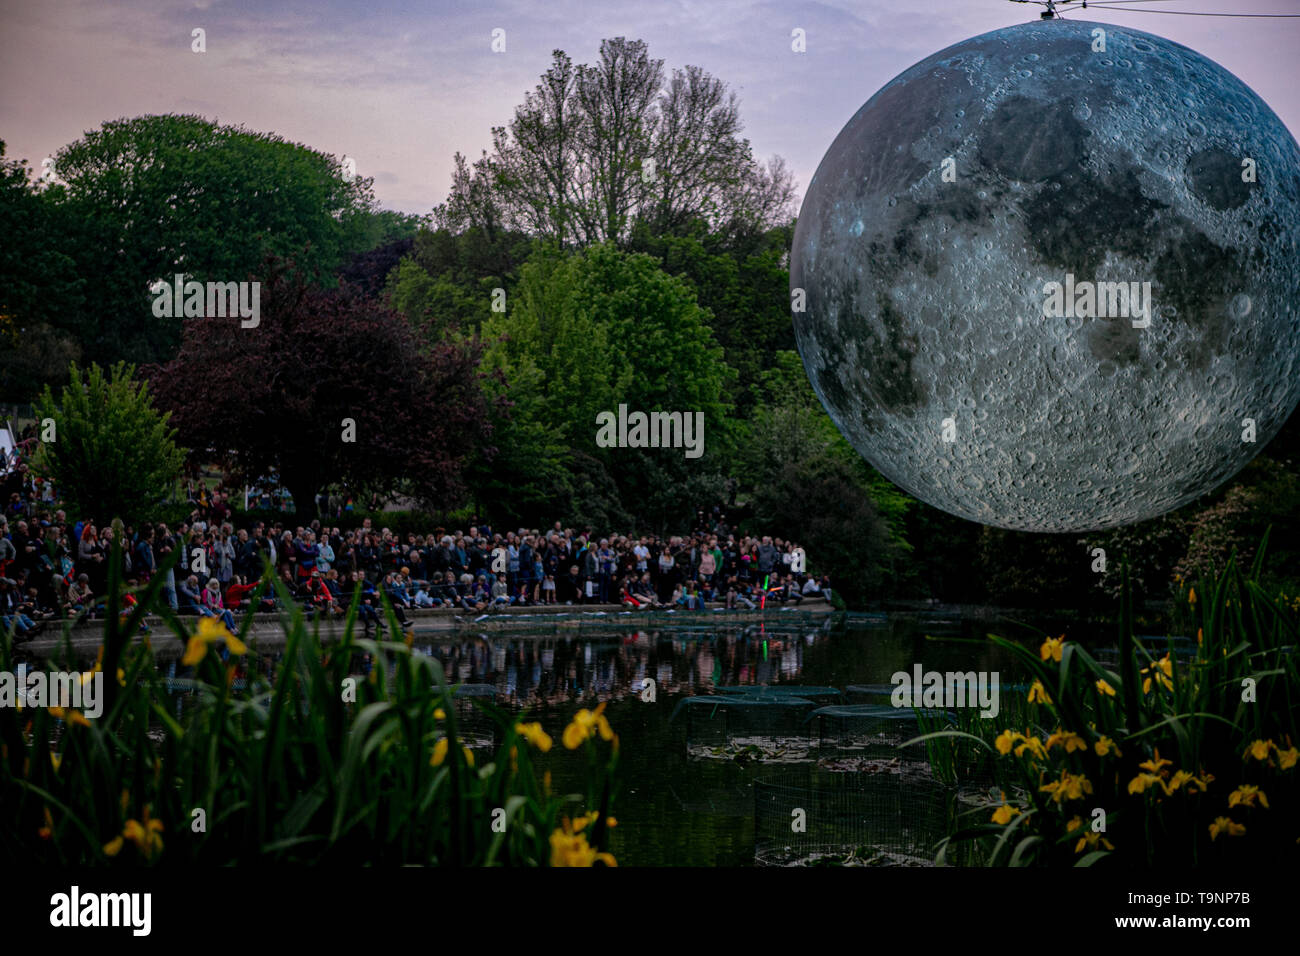 May 18, 2019 - Artist Luke Jerram's 7 metre diameter inflatable moon is suspended over the pond at Queens Park in Brighton during the Brighton Festival. The illuminated lunar model is one of several copies that tour the world for Luke's temporary exhibition. It features detailed NASA images of the moon's surface, with every centimetre of the lit sphere representing 5km of the moon's surface. The free arts event is part of the Brighton Festival, which is an annual celebration of art, music, theatre, dance, circus, and literature, which takes place in the city of Brighton and Hove during the m Stock Photo